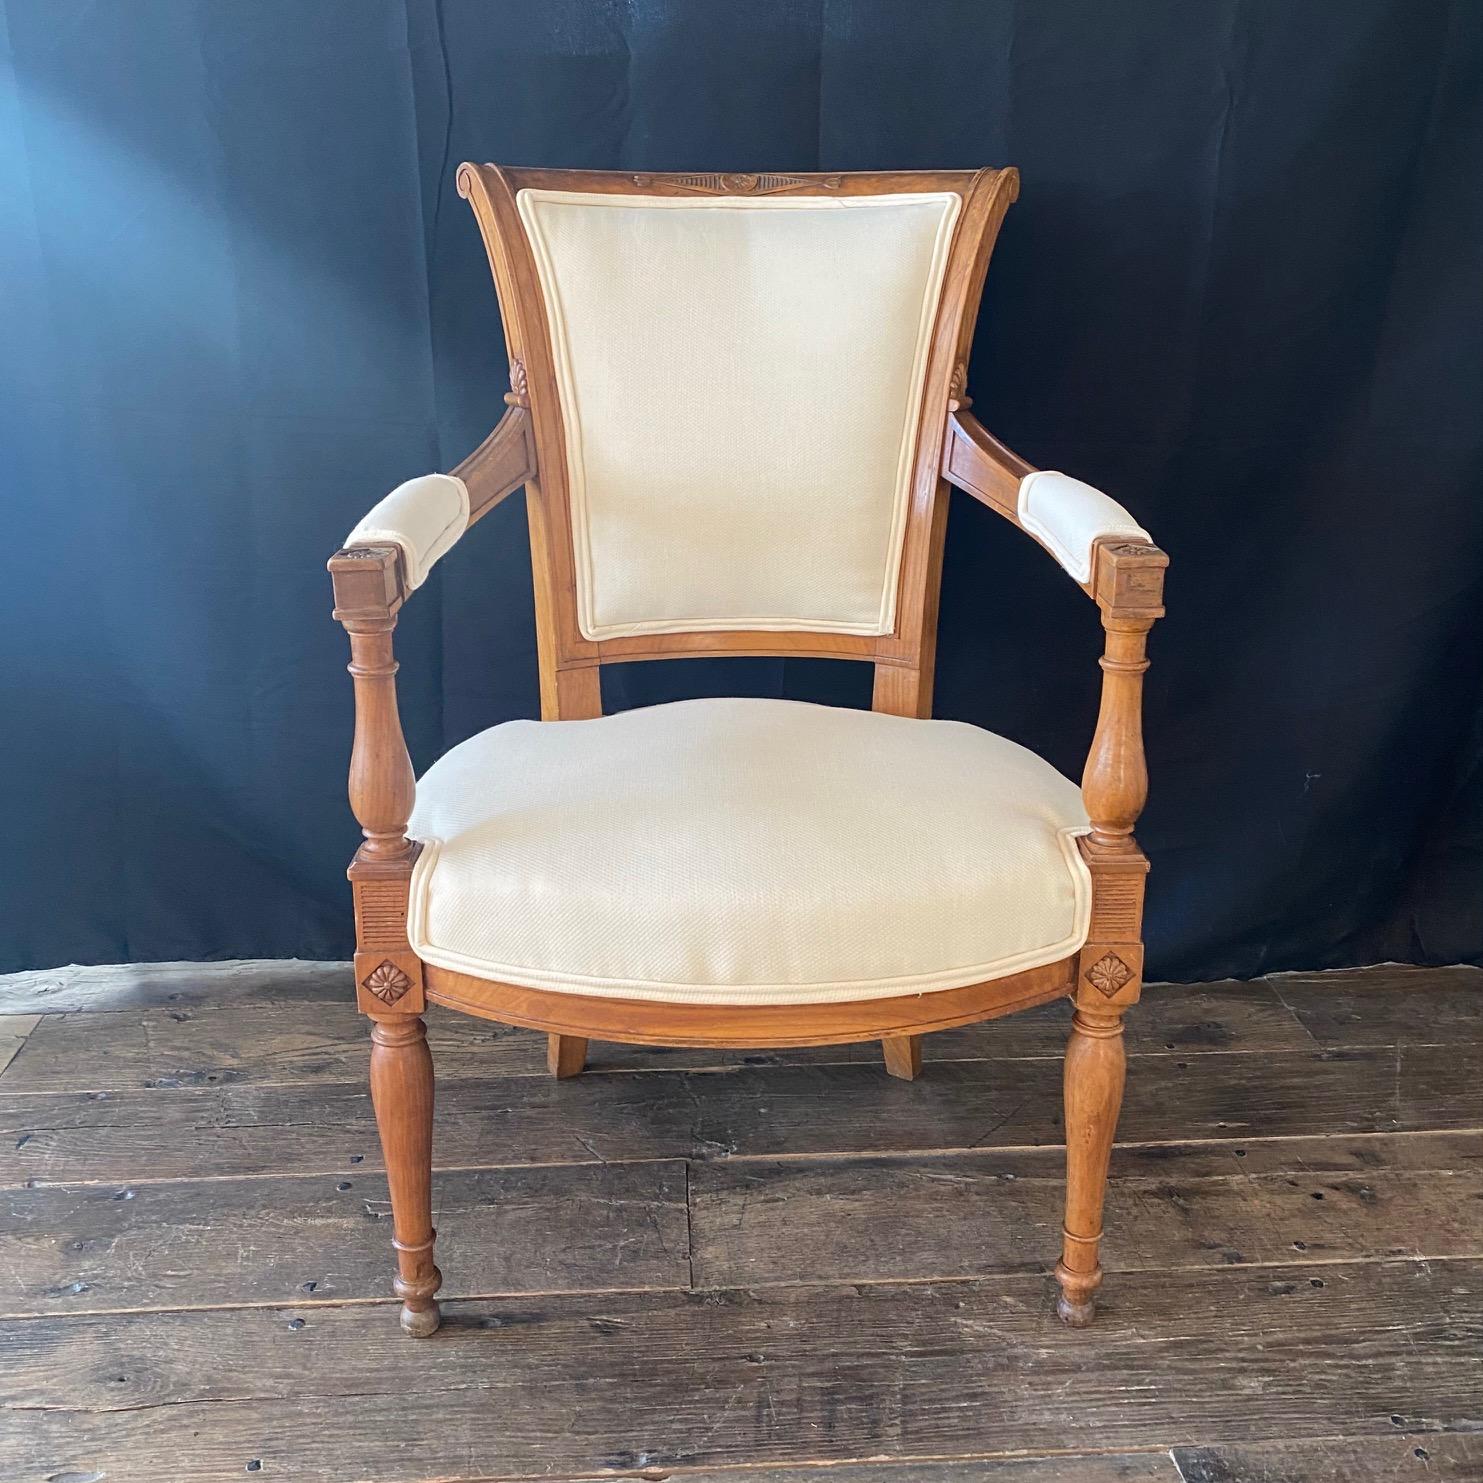 A fine 19th century set of 4 French neoclassical dining chairs from the Directoire period with stunning intricately carved walnut frames (see photos for detail). Lovely curved backsplats and reupholstered in neutral high end fabric designed to show